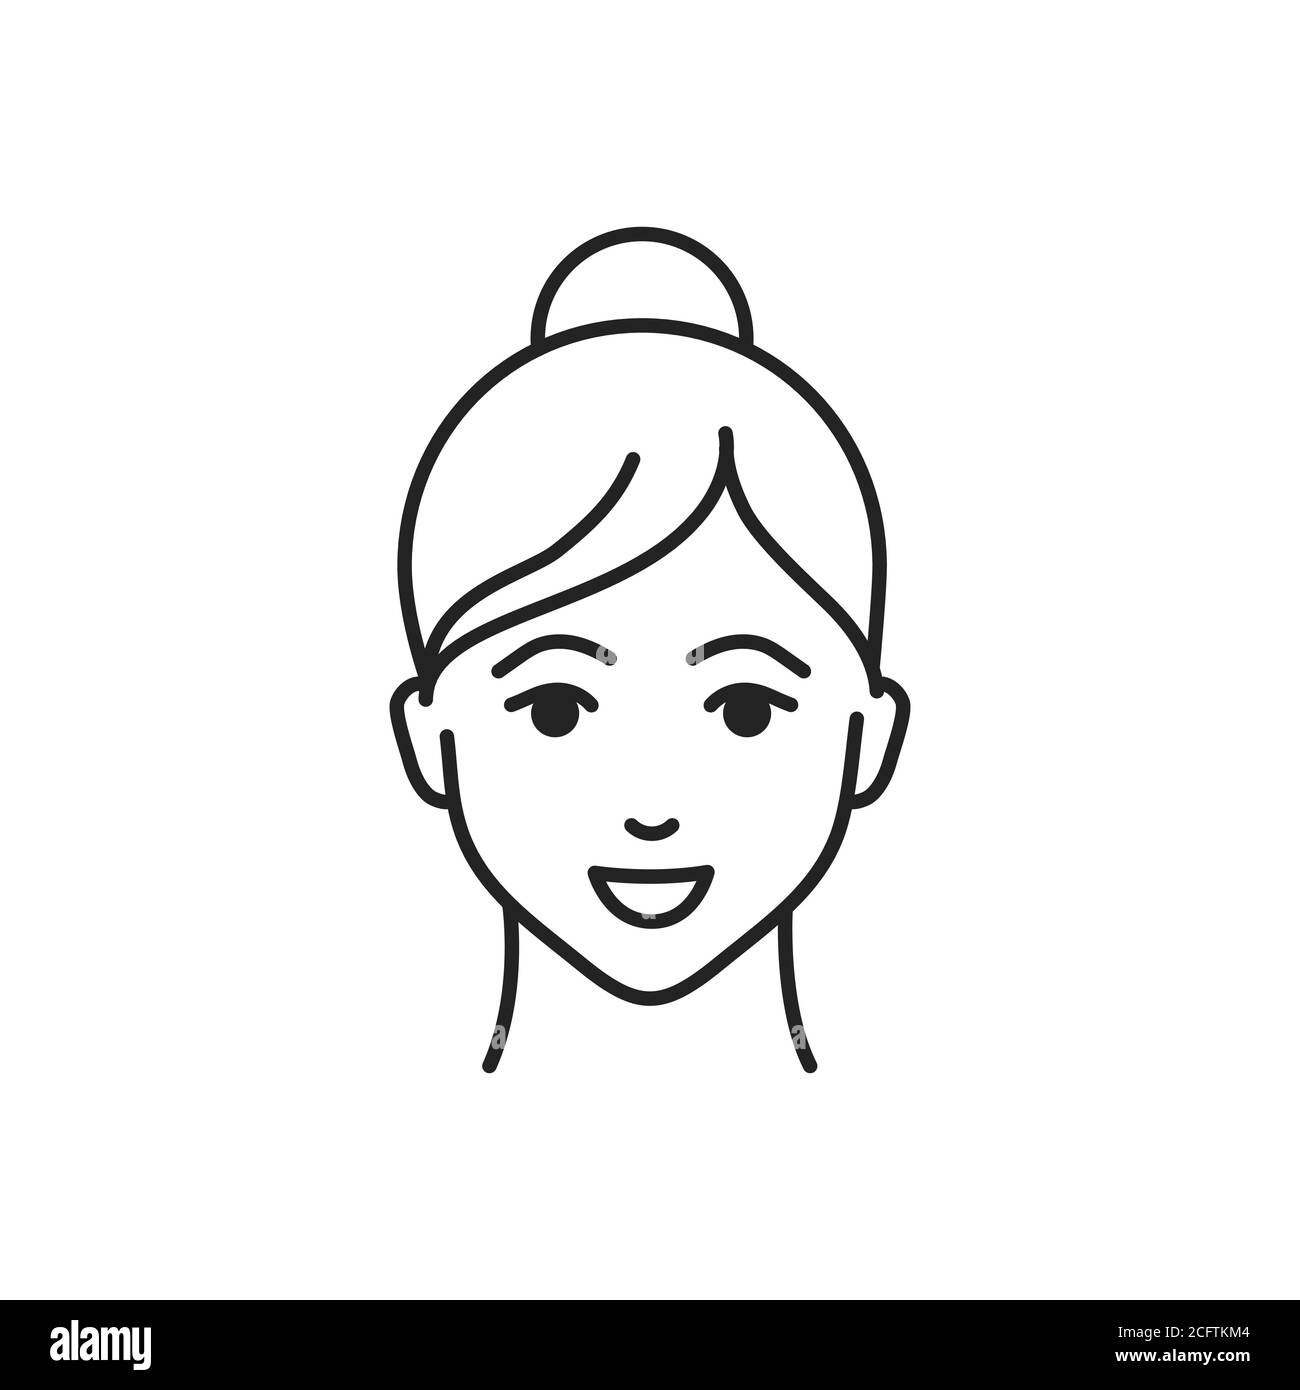 Human feeling sympathy line black icon. Face of a young girl depicting emotion sketch element. Cute character on white background. Stock Vector